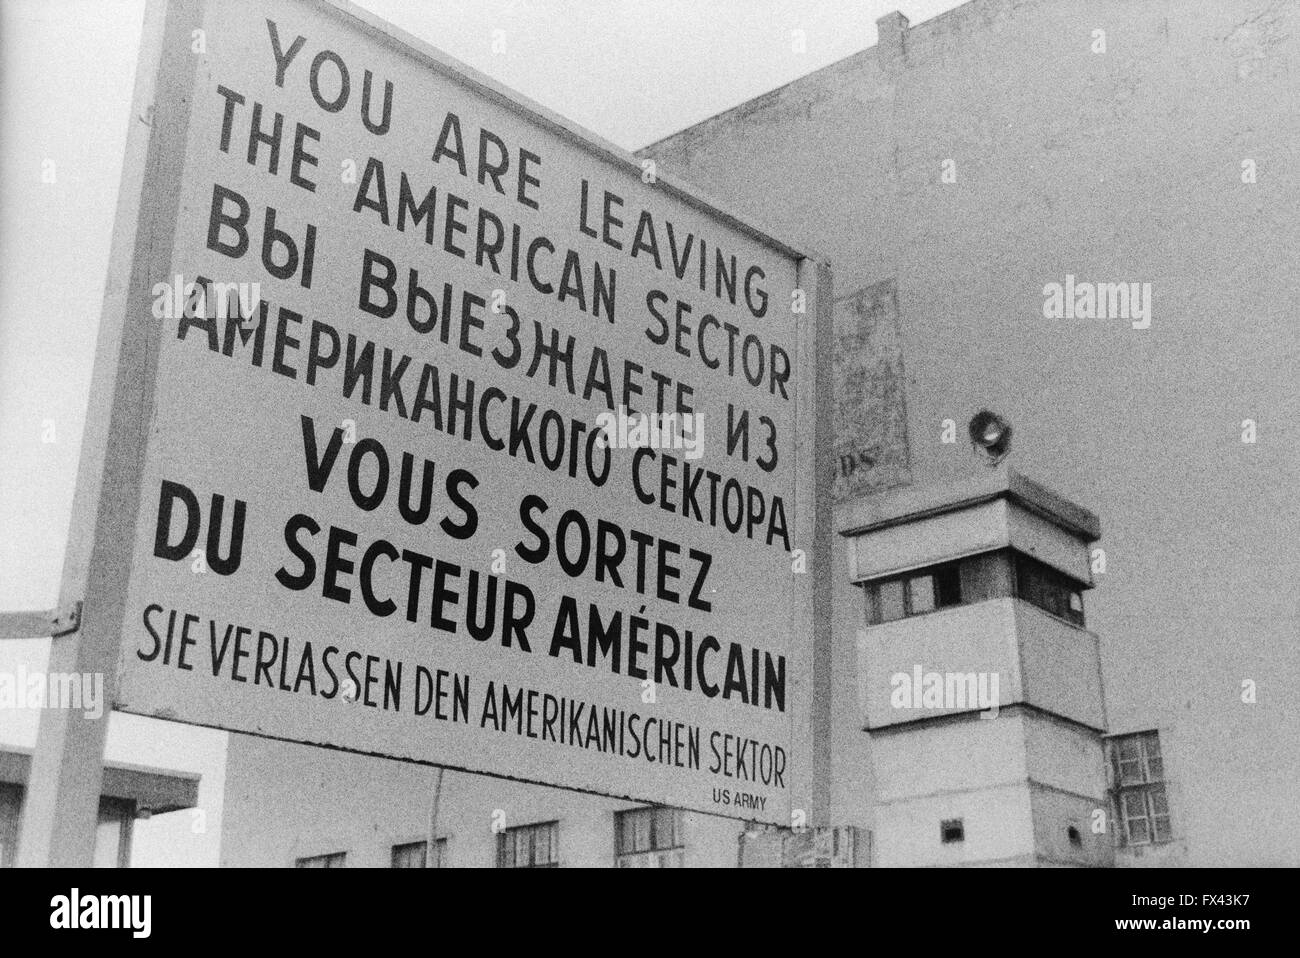 Archive image of Checkpoint Charlie sign near Potsdamer Platz, Berlin, Germany, March 1994 'You are leaving the American Sector' 'Vous sortez du secteur Americain' 'Sie verlassen den Amerikanischen sektor', with watchtower Stock Photo